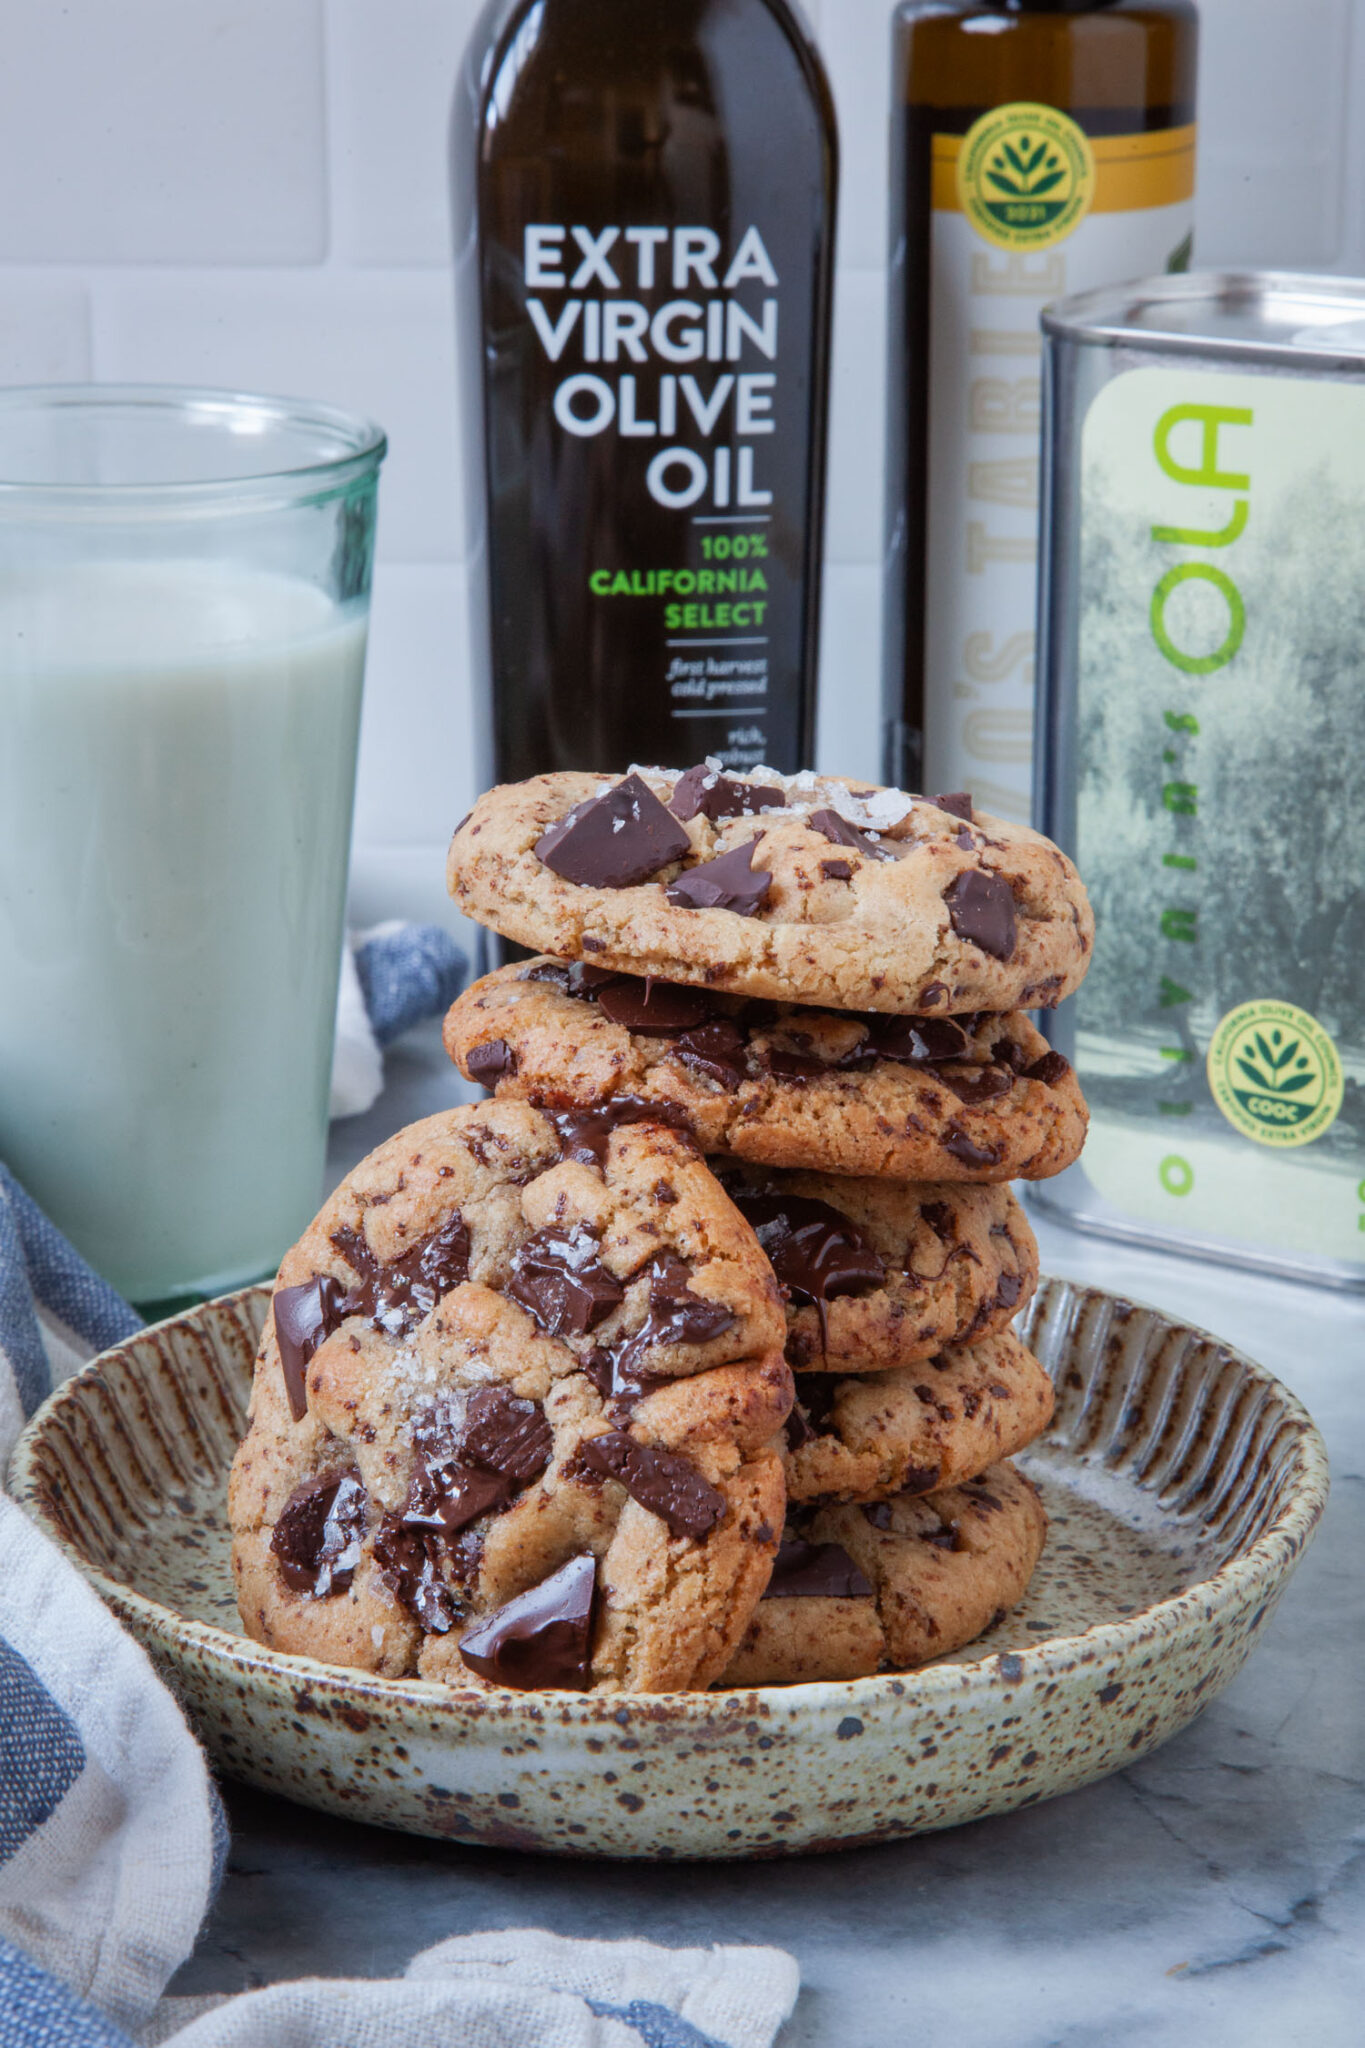 A plate with a stack of extra virgin olive oil cookies on it, with bottles of extra virgin olive oil behind it, along with a glass of milk.